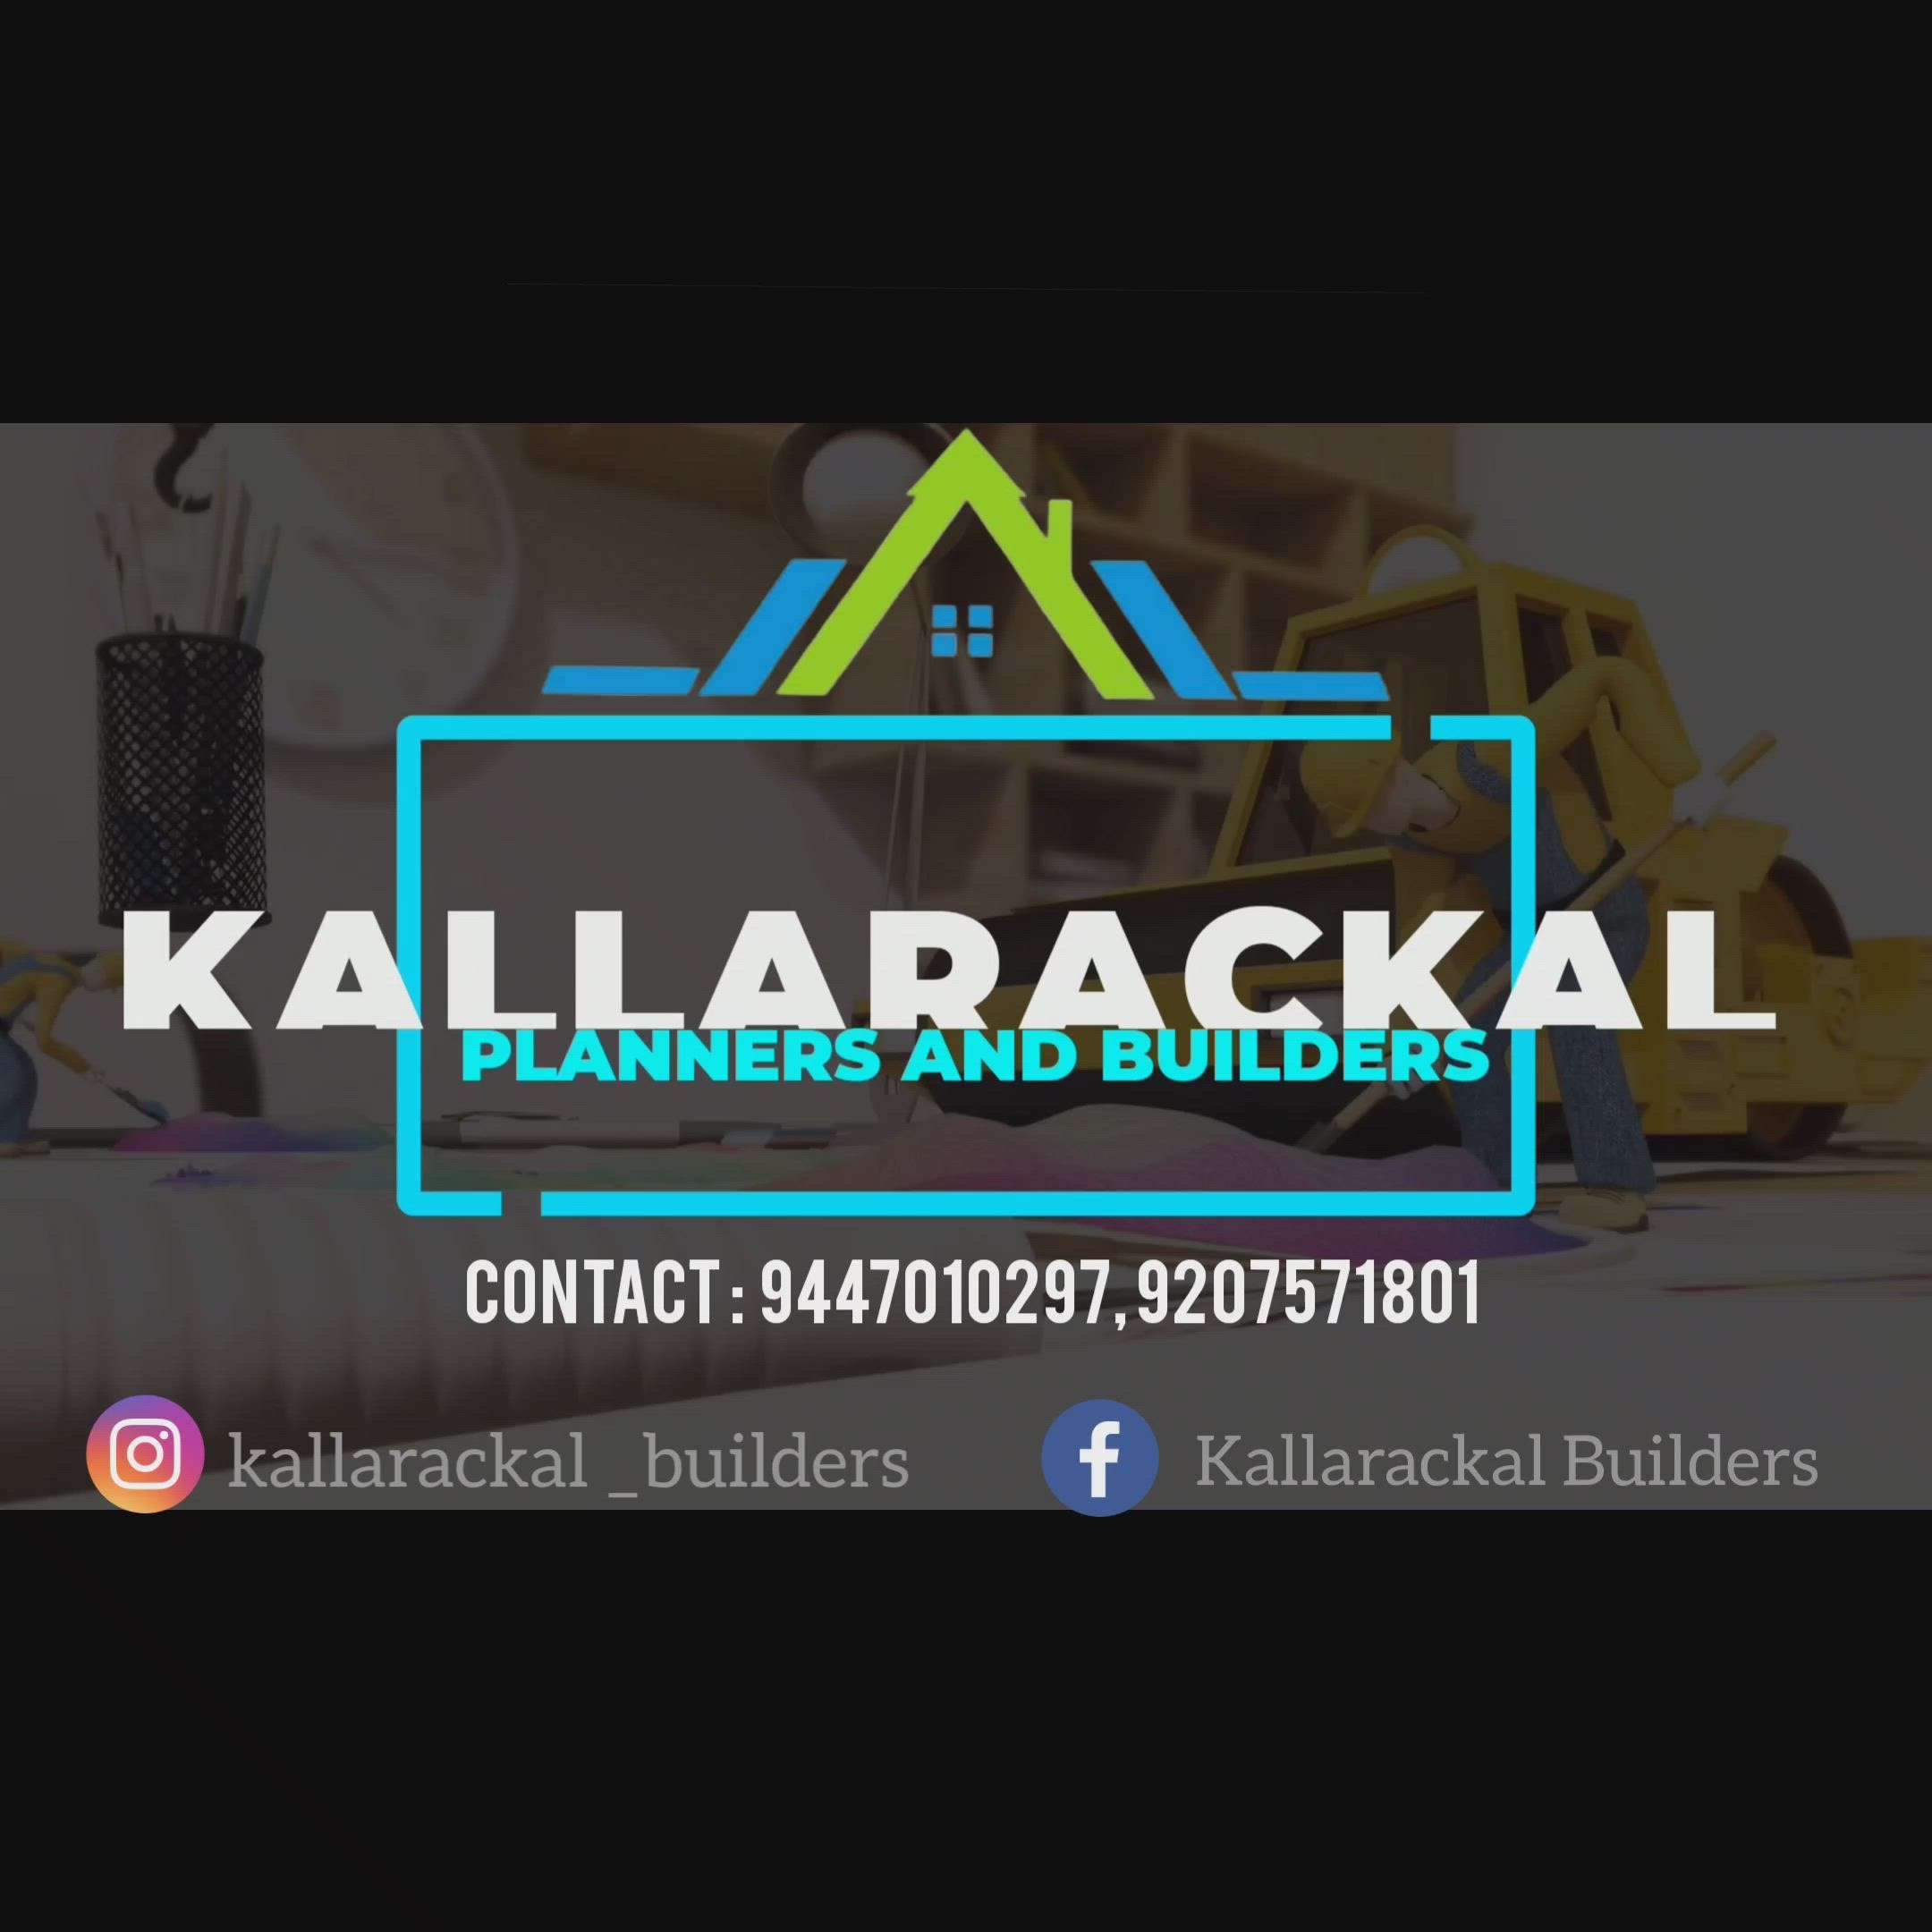 Our New Completed Project🏠

VARIKATTU RESIDENCEY
2BHK 13 Apartments 

Built up area : 12000 sqft

Client : Mathew George & Sheena Mathew
Location : Cherpunkal , Kottayam.

We build your dream home in your own land in your dream concept

For more details Visit : KALLARACKAL PLANNERS AND BUILDERS
SURYA TOWER
OPP: ST. MARY'S CHURCH LALAM, PALA
CONTACT : +91-9447010297, +91-9207571801